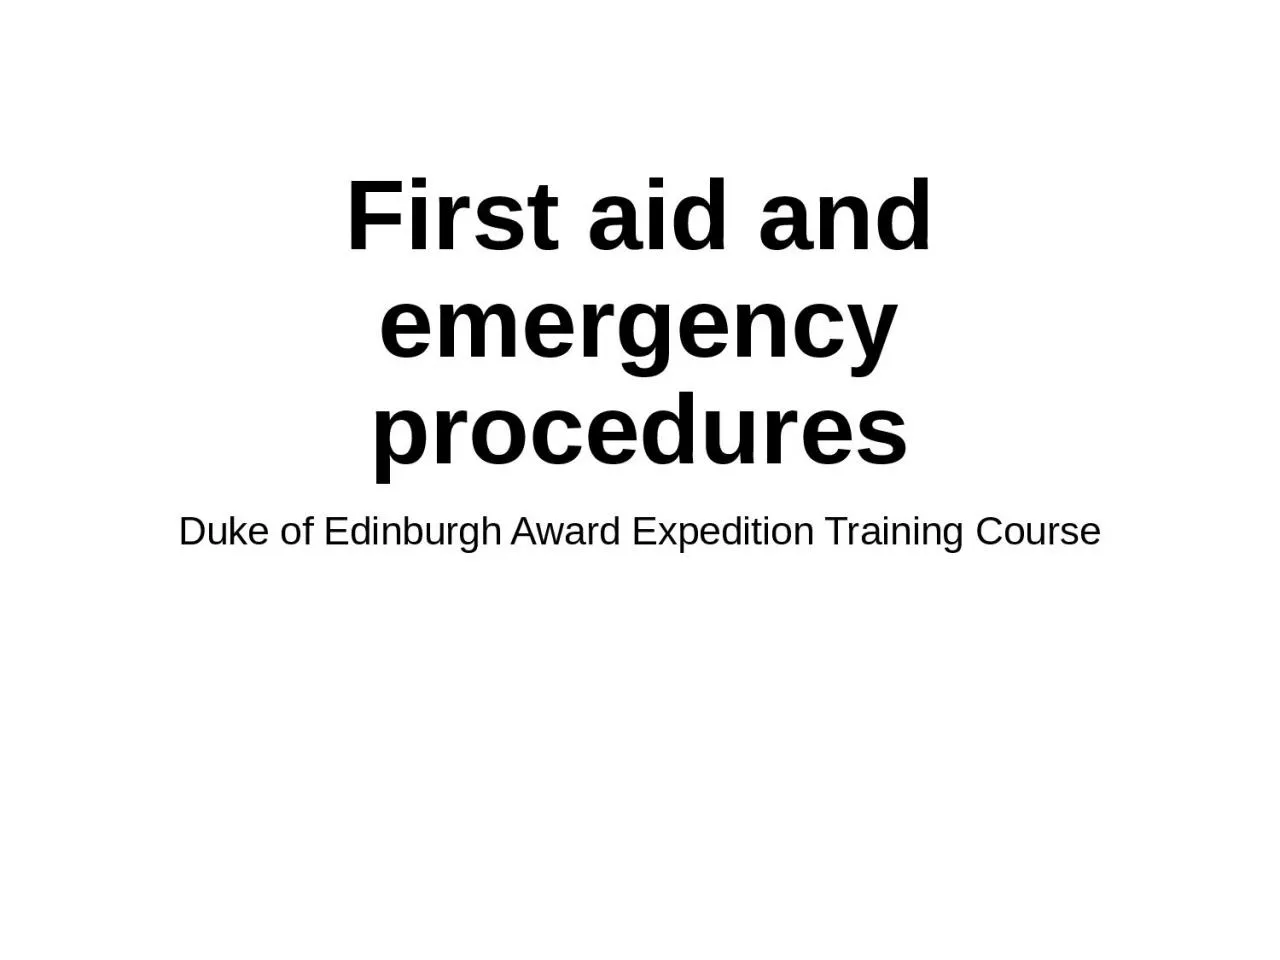 First aid and emergency procedures